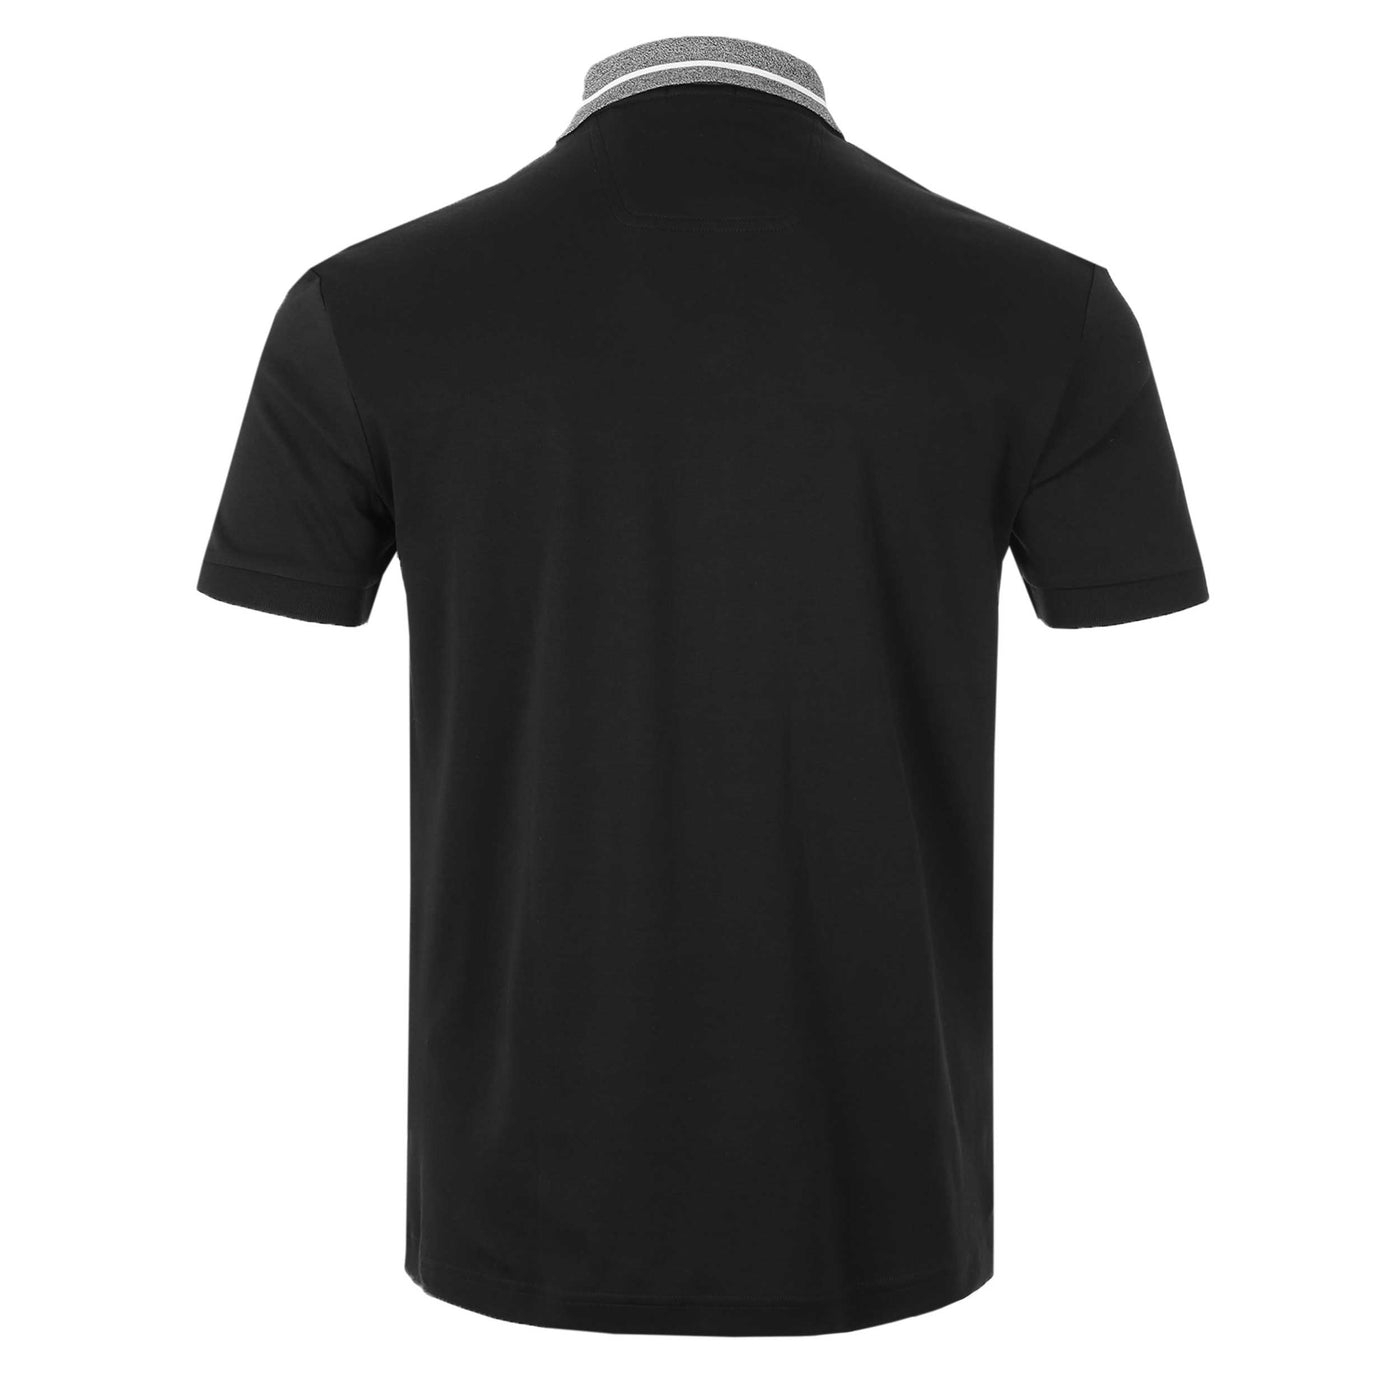 Boss Paddy 1 Polo Shirt in Black Back